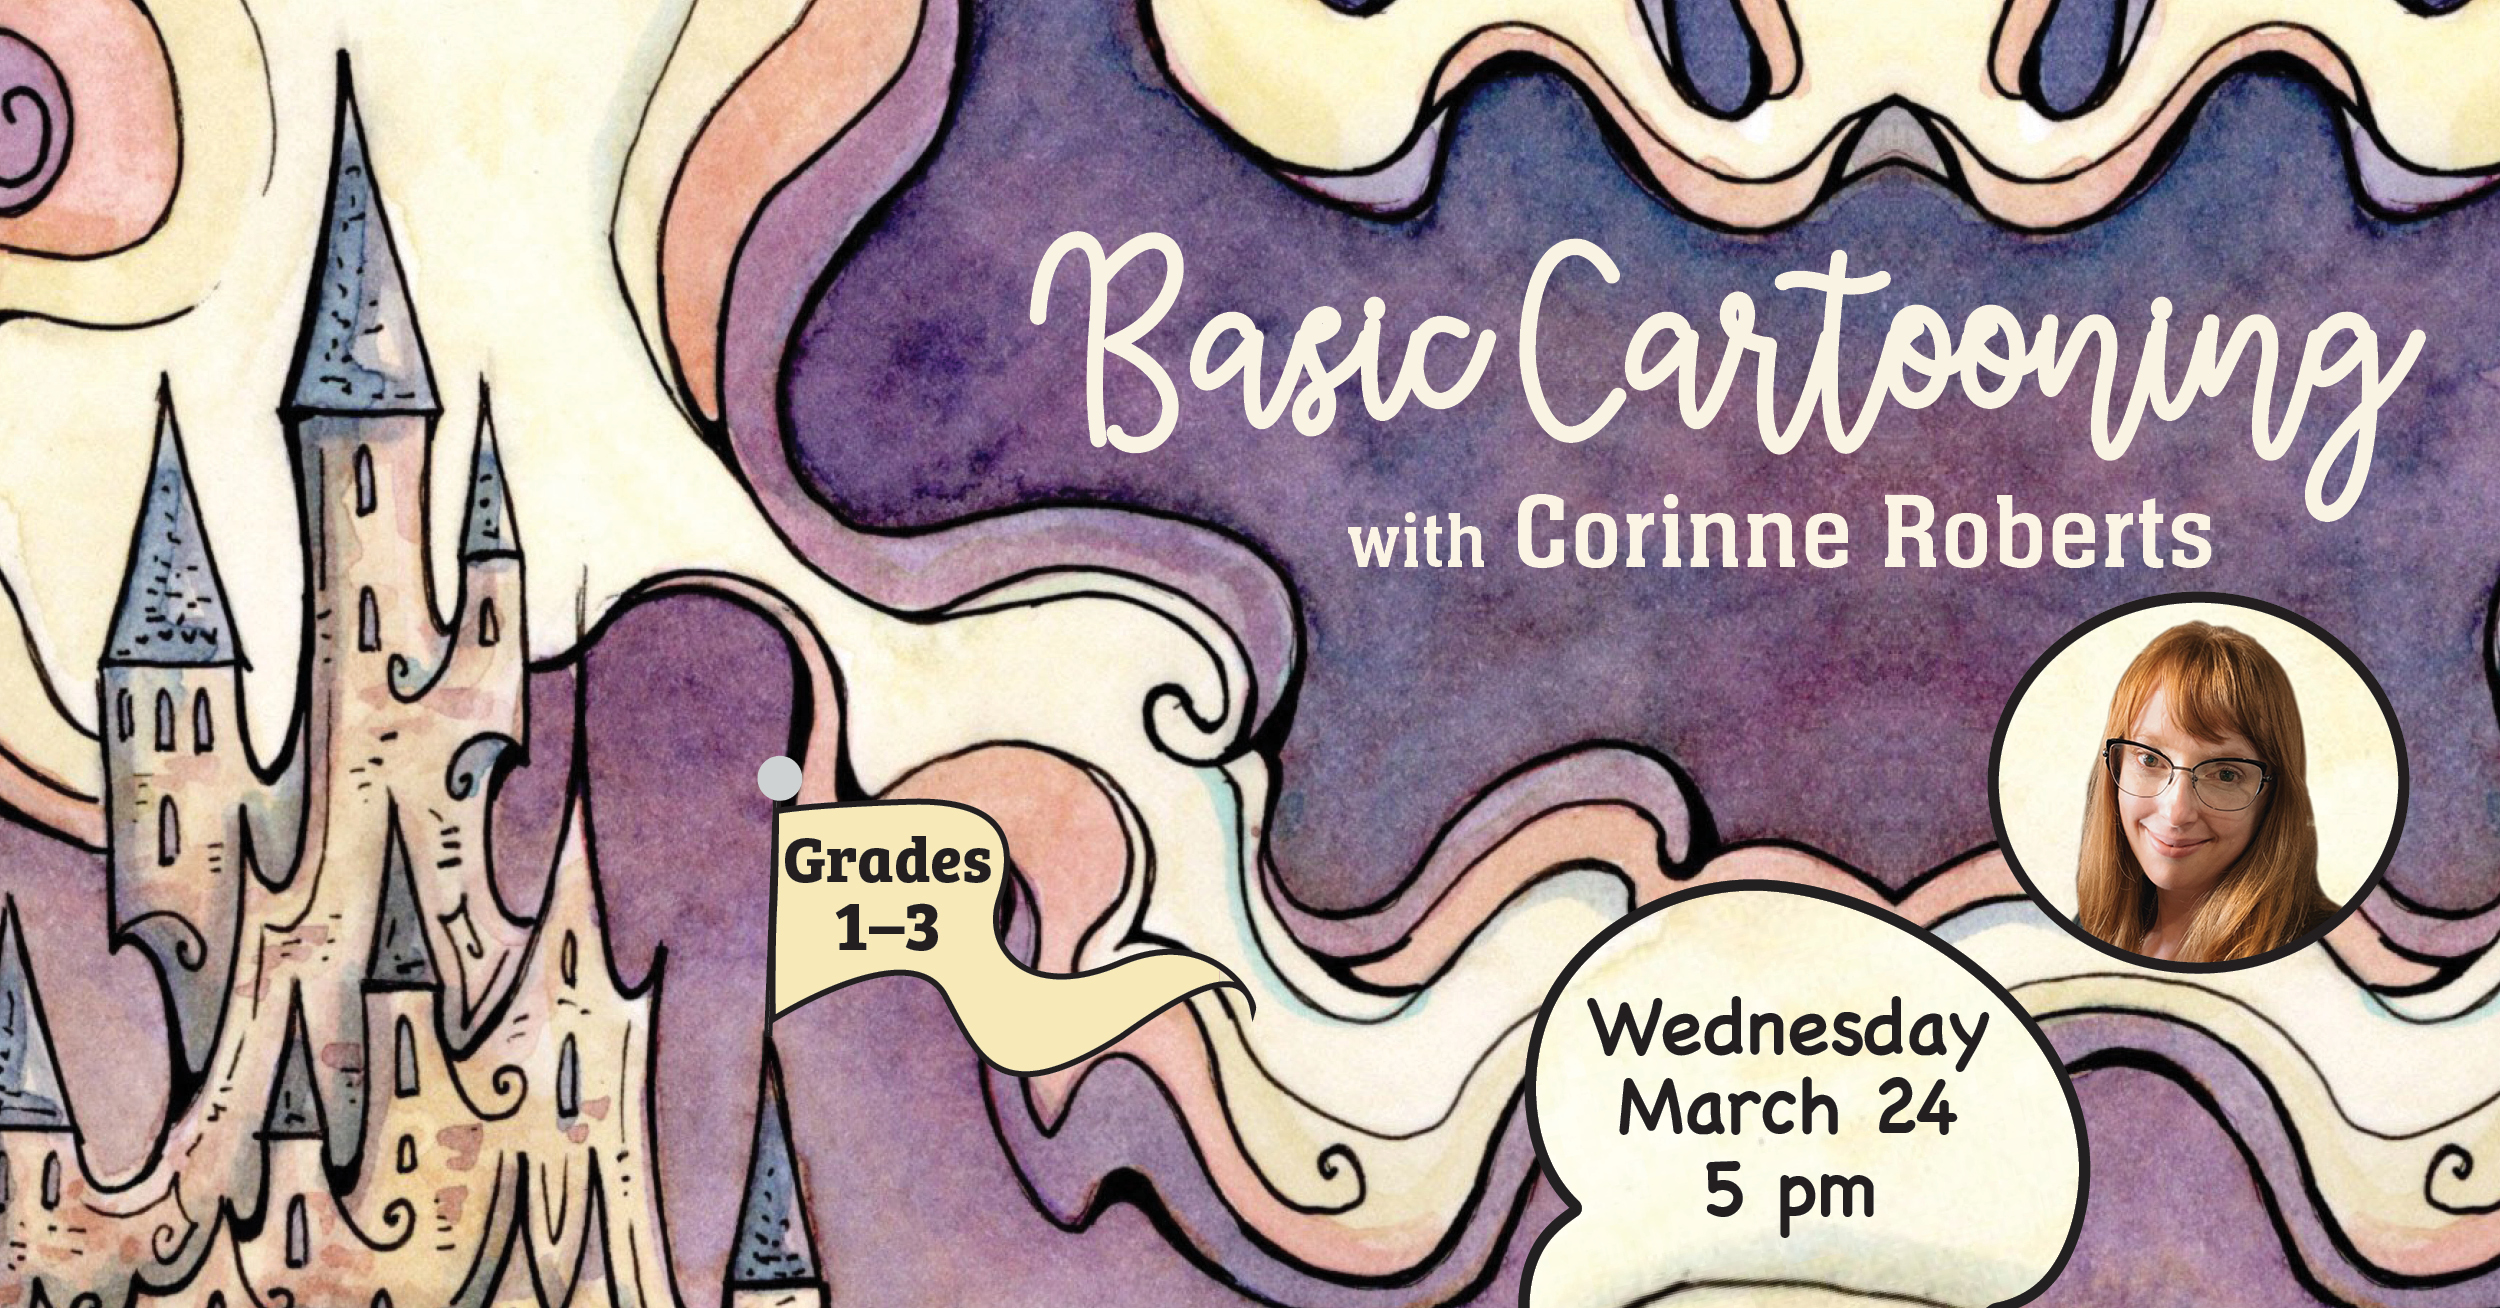 Basic Cartooning with Corinne Roberts Grades one to three. Wednesday March twenty-fourth at 5pm